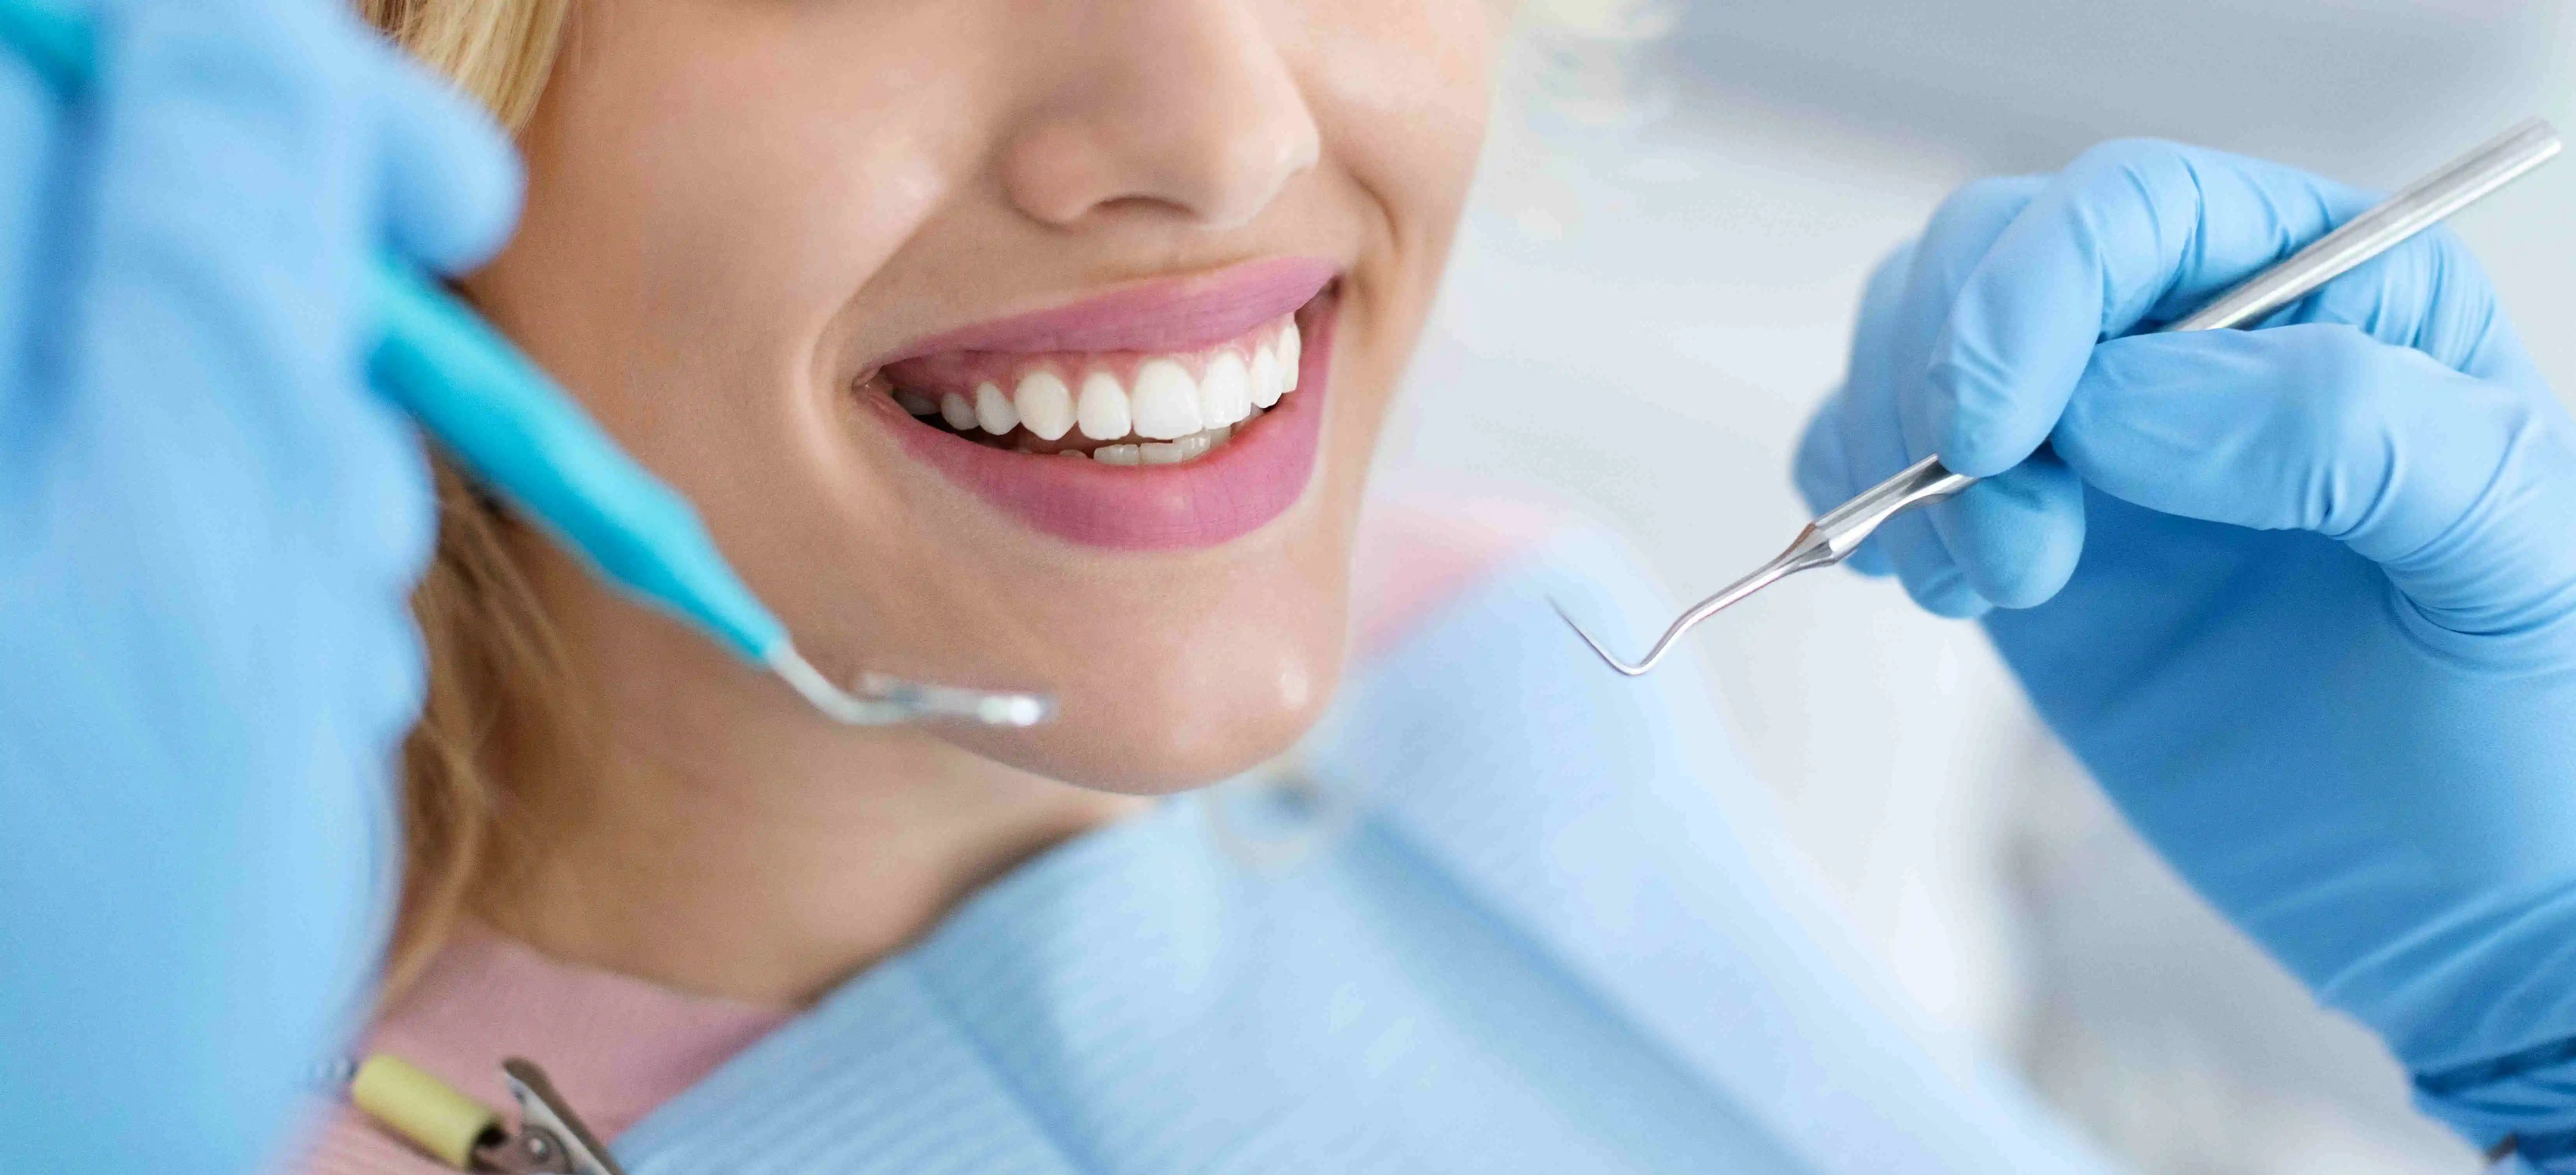 Tips & Tricks of How to Find a Good Dentist